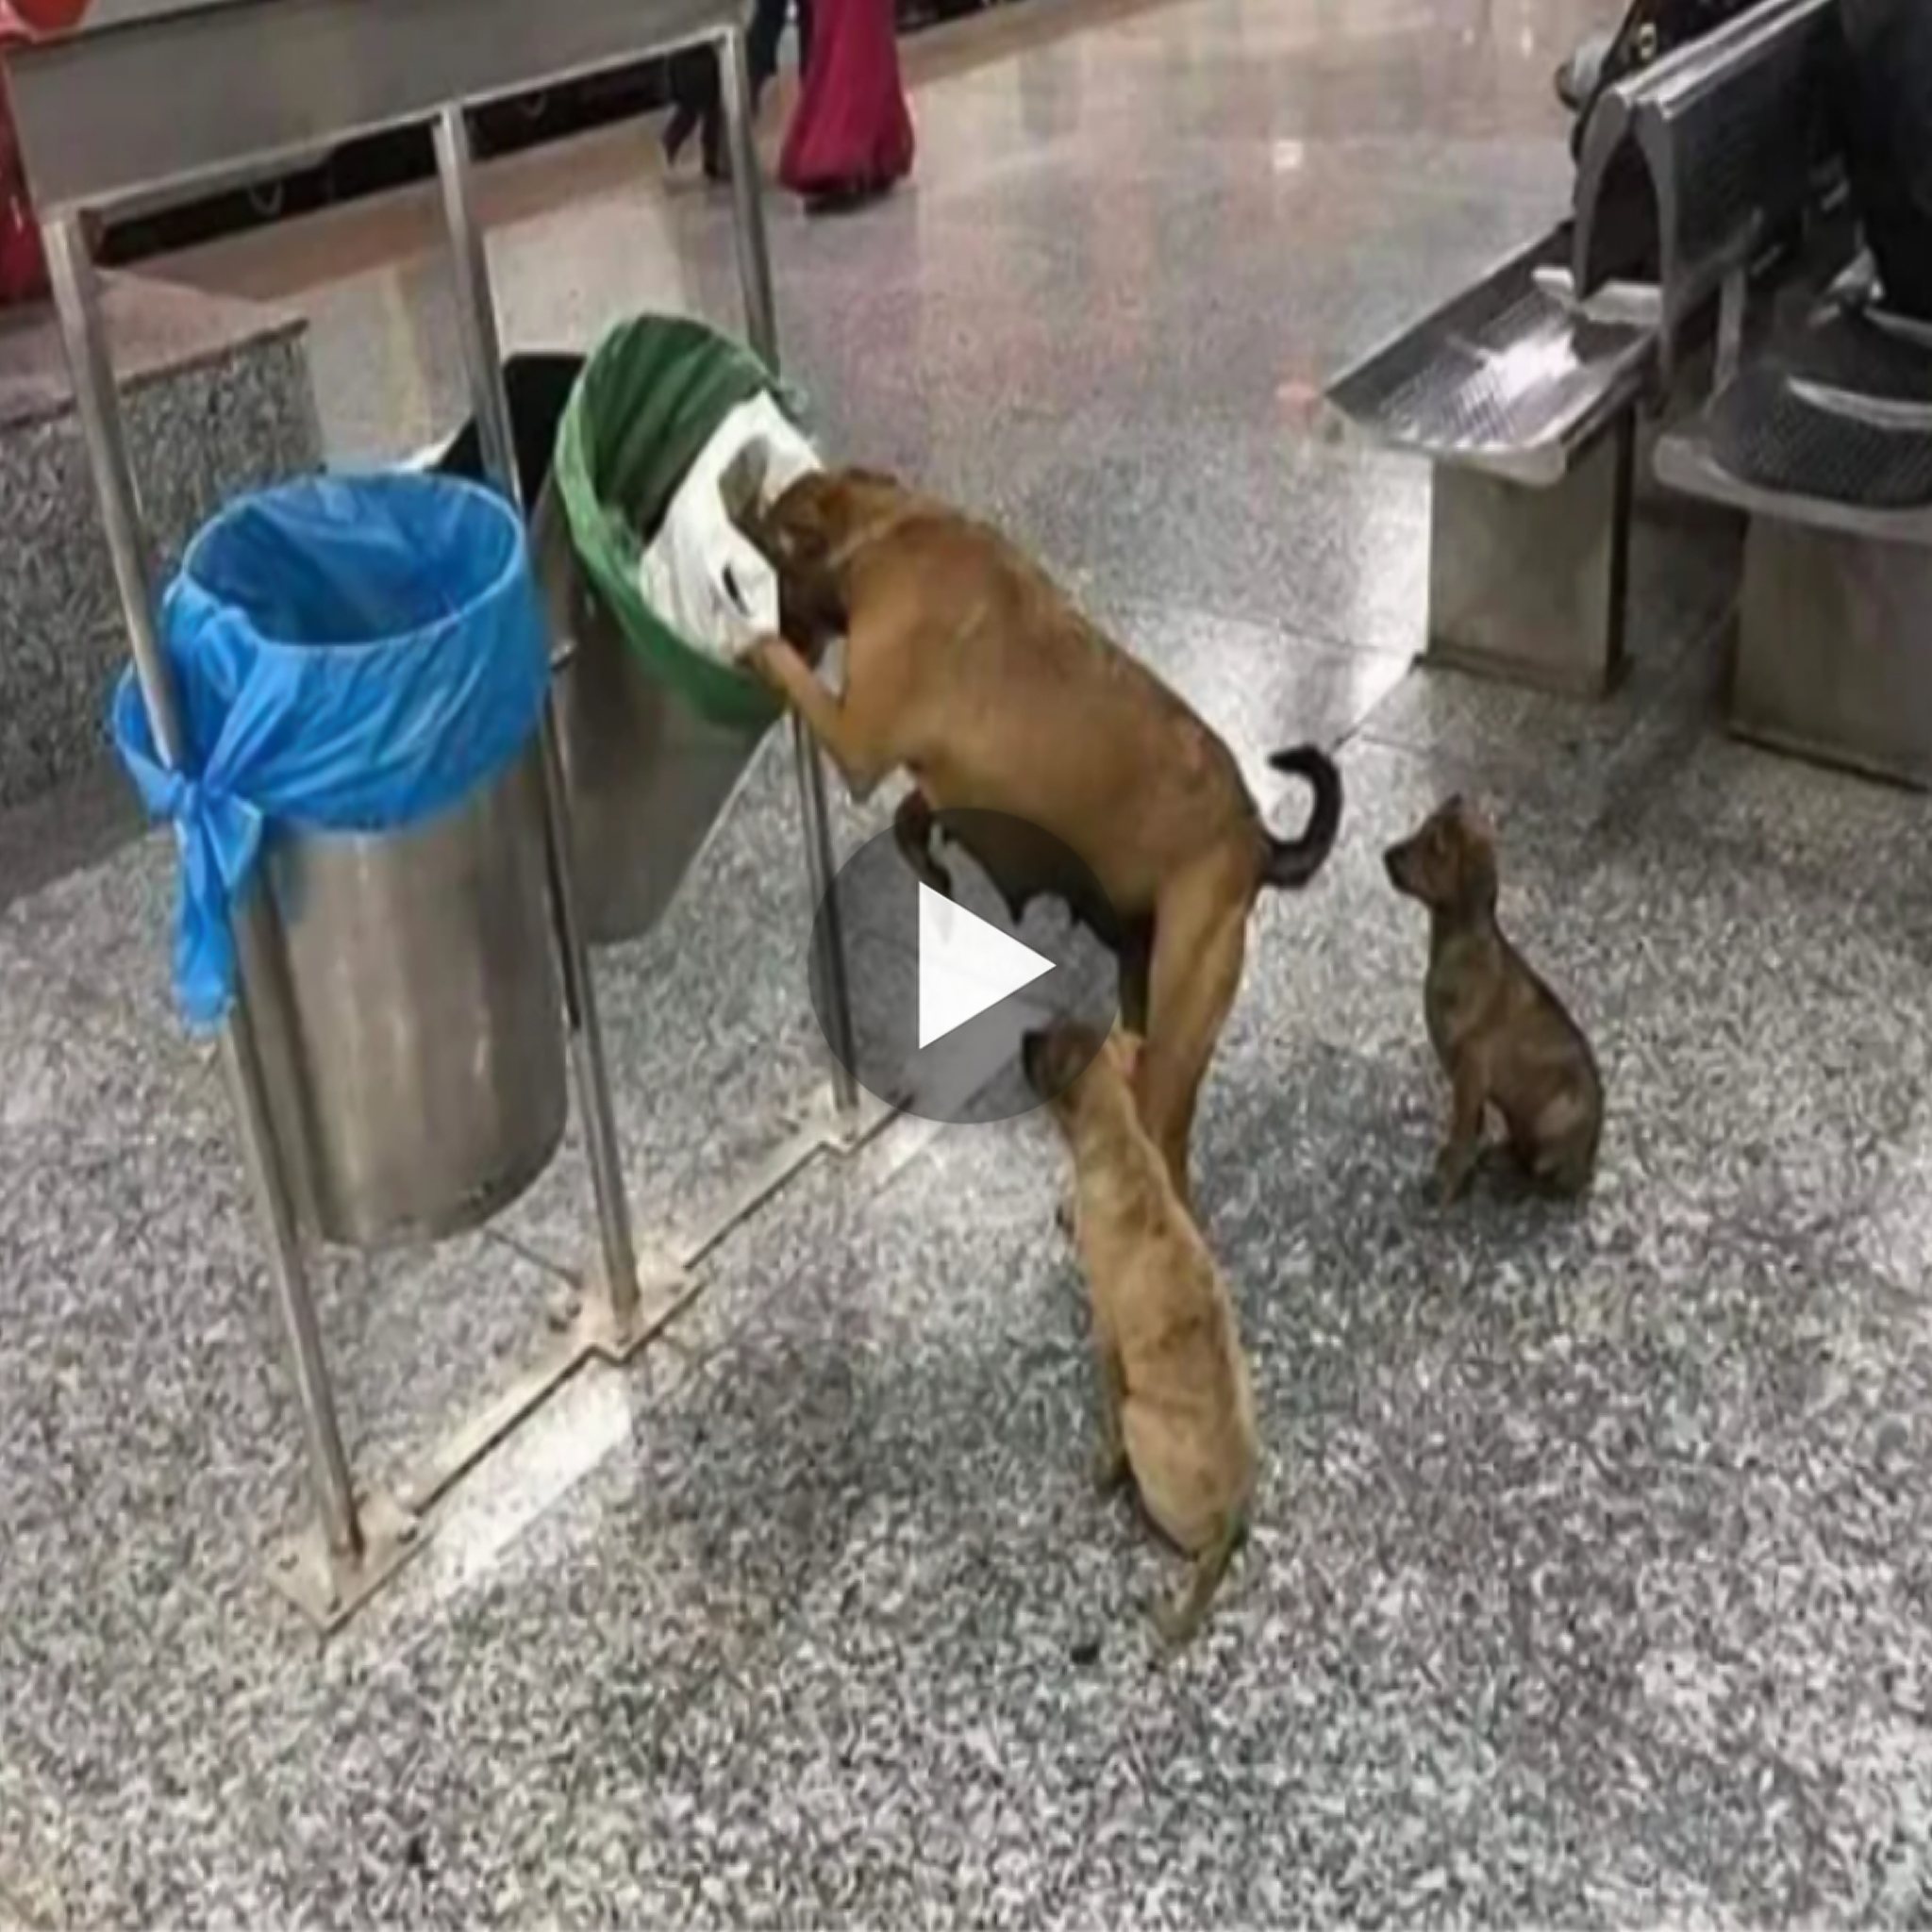 Emotional Resonance: Millions of people are moved by the compassionate act of a mother dog cheering through the trash to find food for her starving puppies.